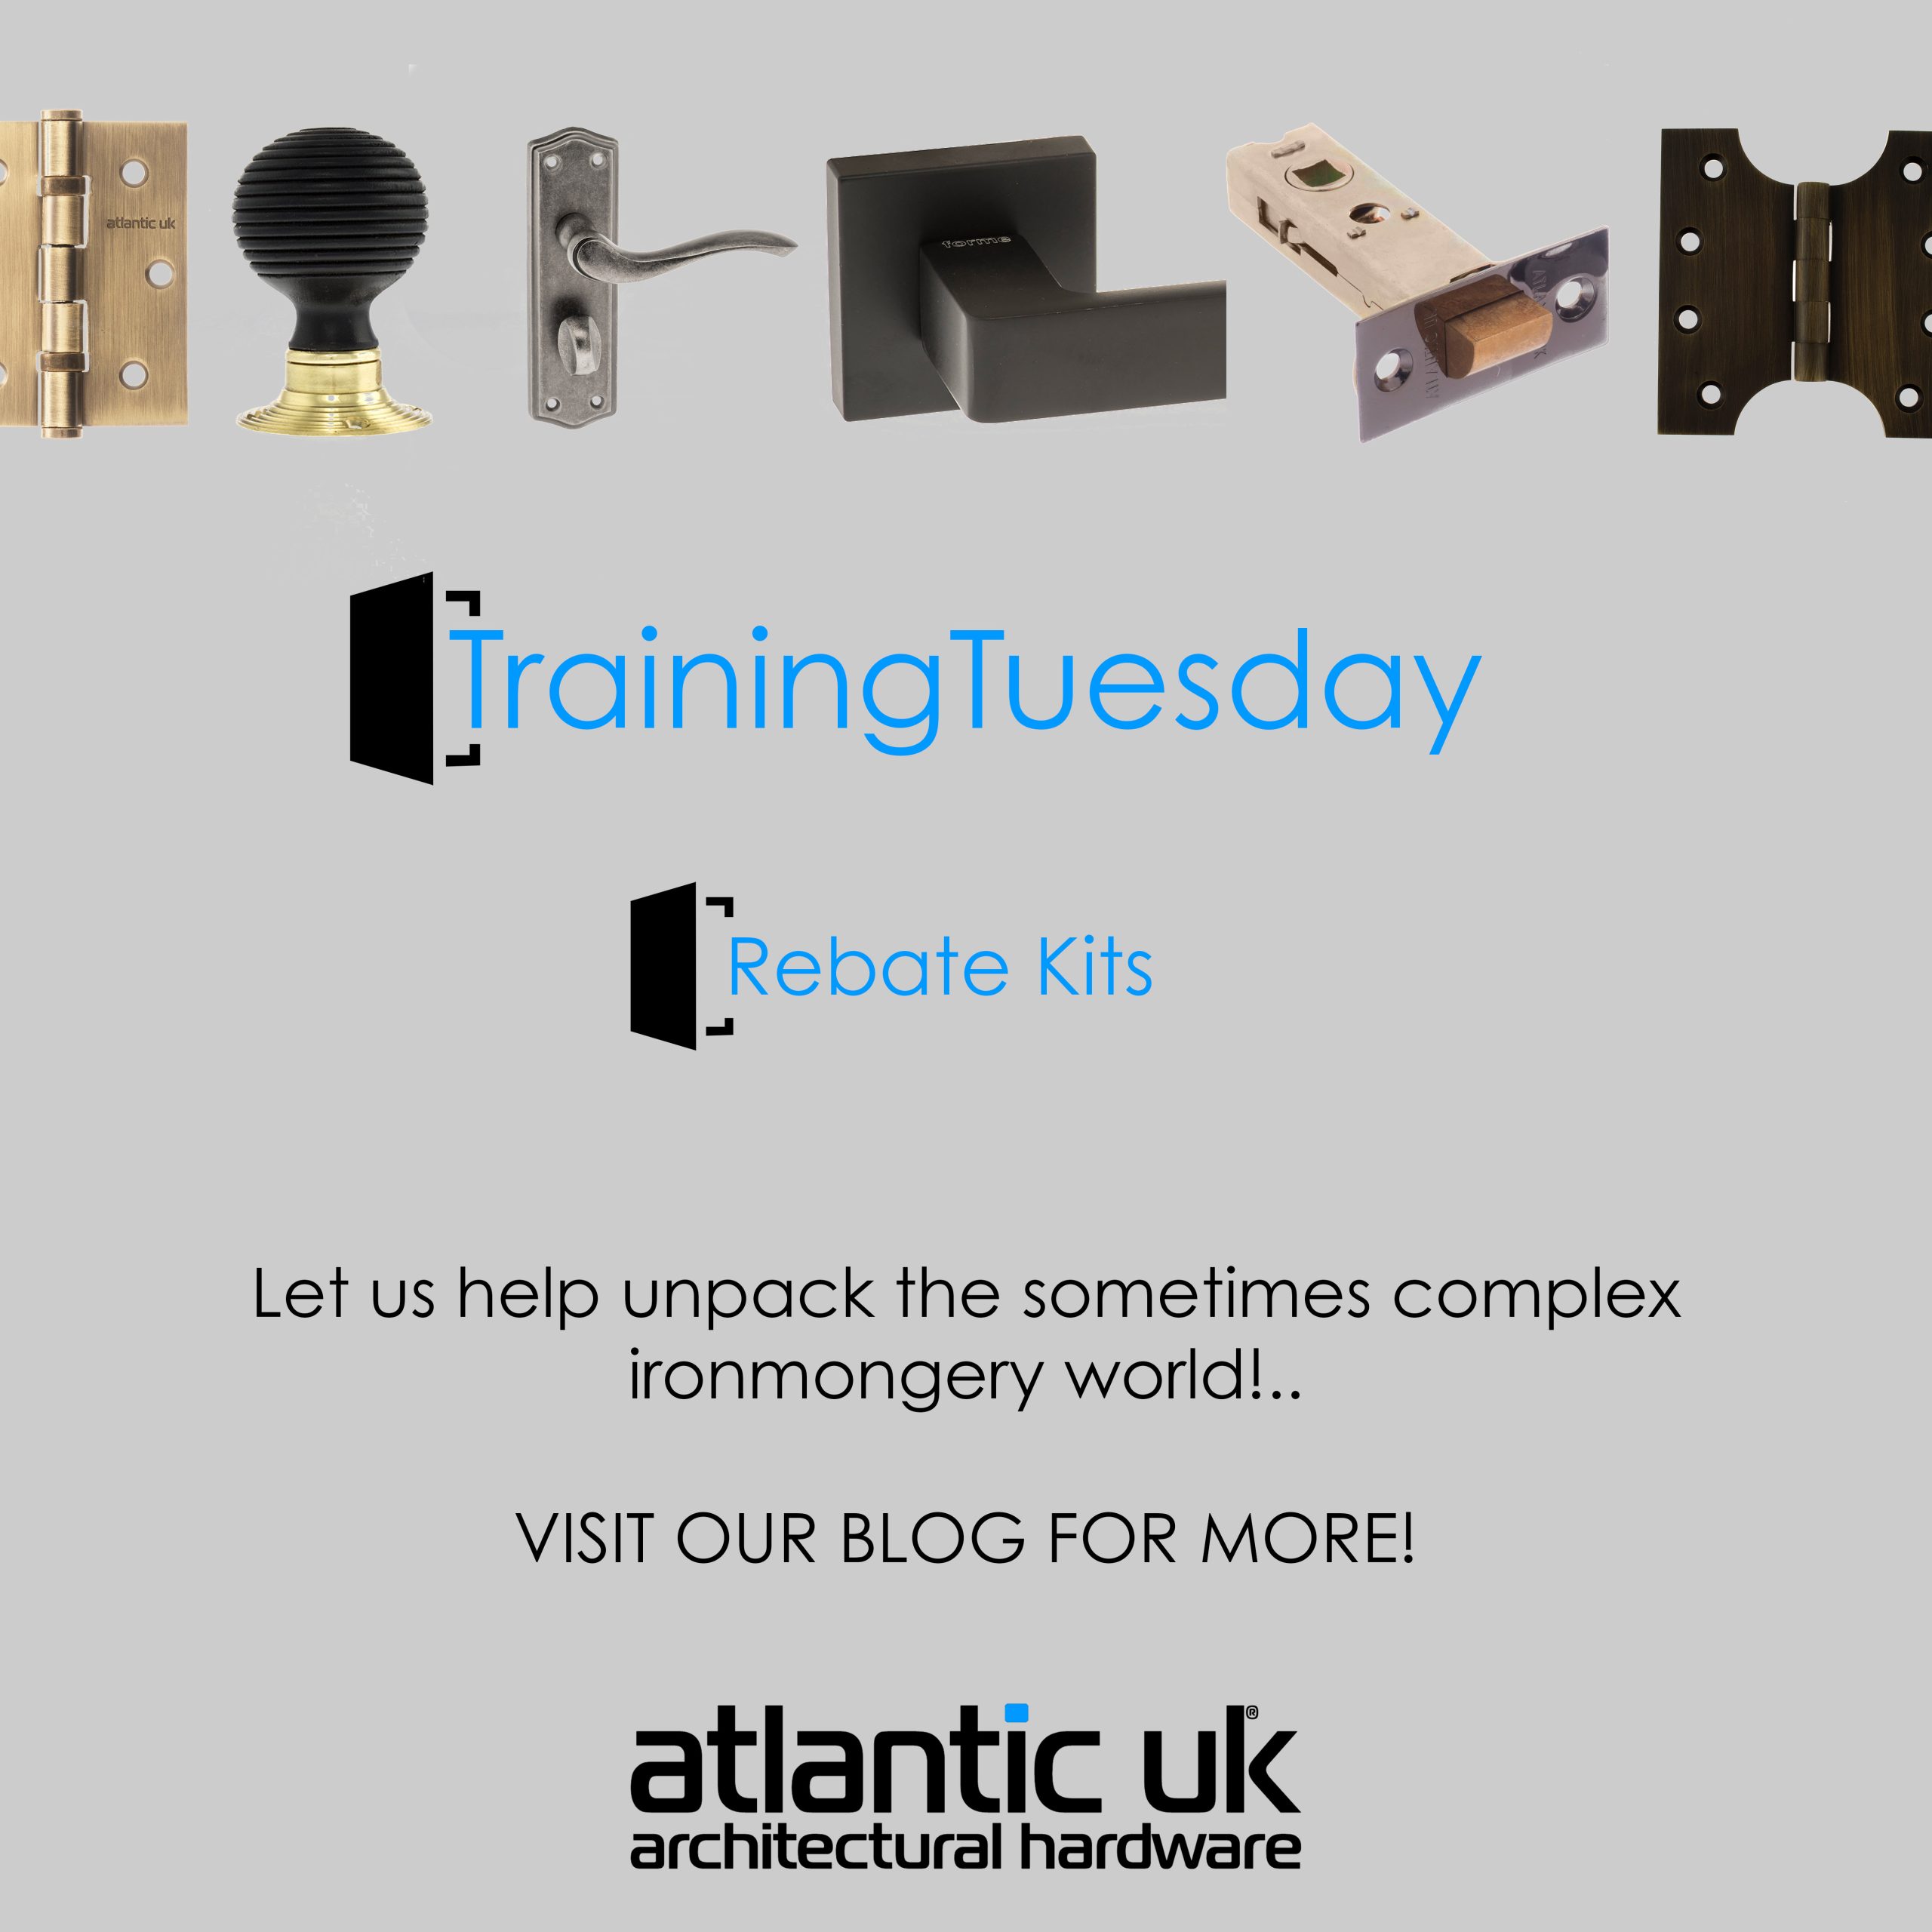 Training Tuesday! What are Rebate Kits?